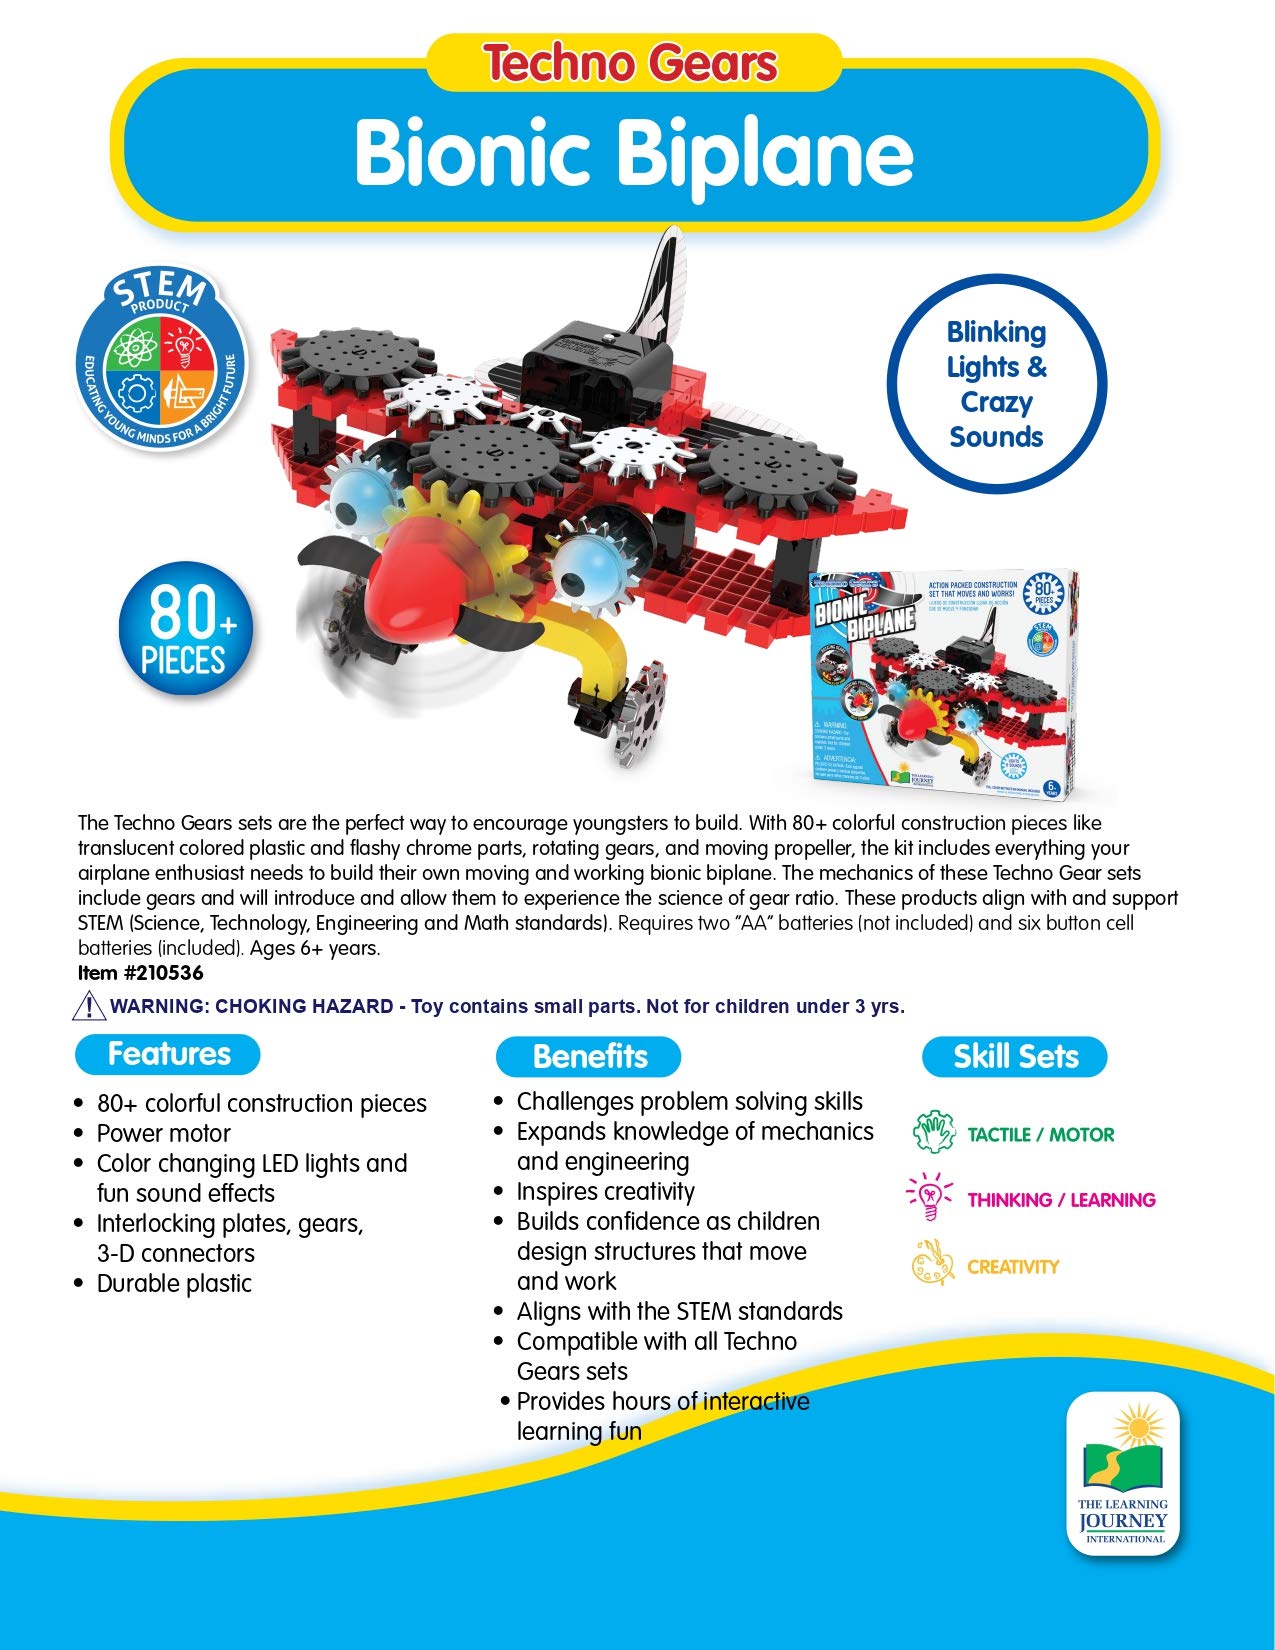 The Learning Journey - Techno Gears - Bionic Biplane - 80+ Pieces - Toy Interlocking Gear Sets for Boys & Girls Ages 6 - 12 Years - Award Winning Toys, (210536)